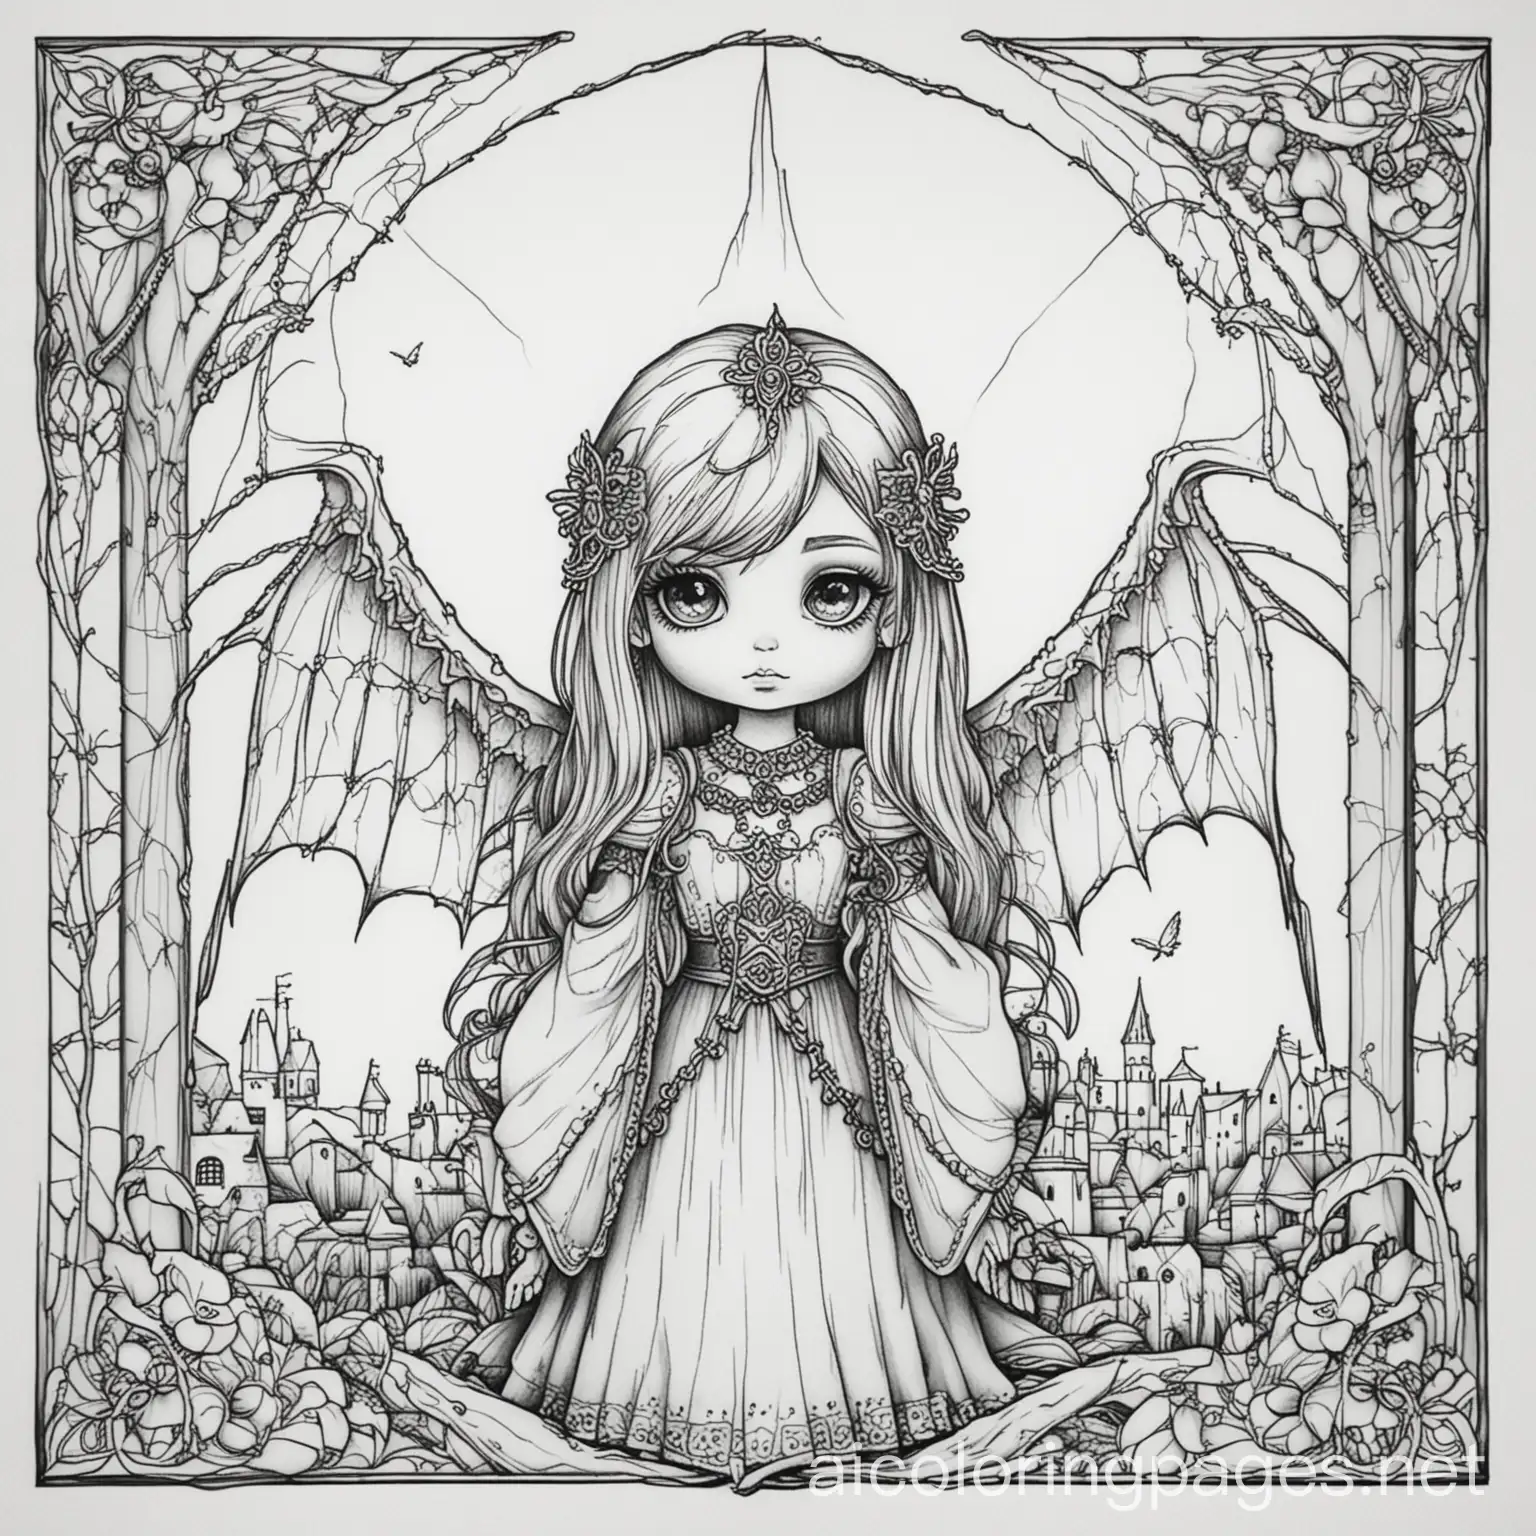 gothic dark angle, Coloring Page, black and white, line art, white background, Simplicity, Ample White Space. The background of the coloring page is plain white to make it easy for young children to color within the lines. The outlines of all the subjects are easy to distinguish, making it simple for kids to color without too much difficulty